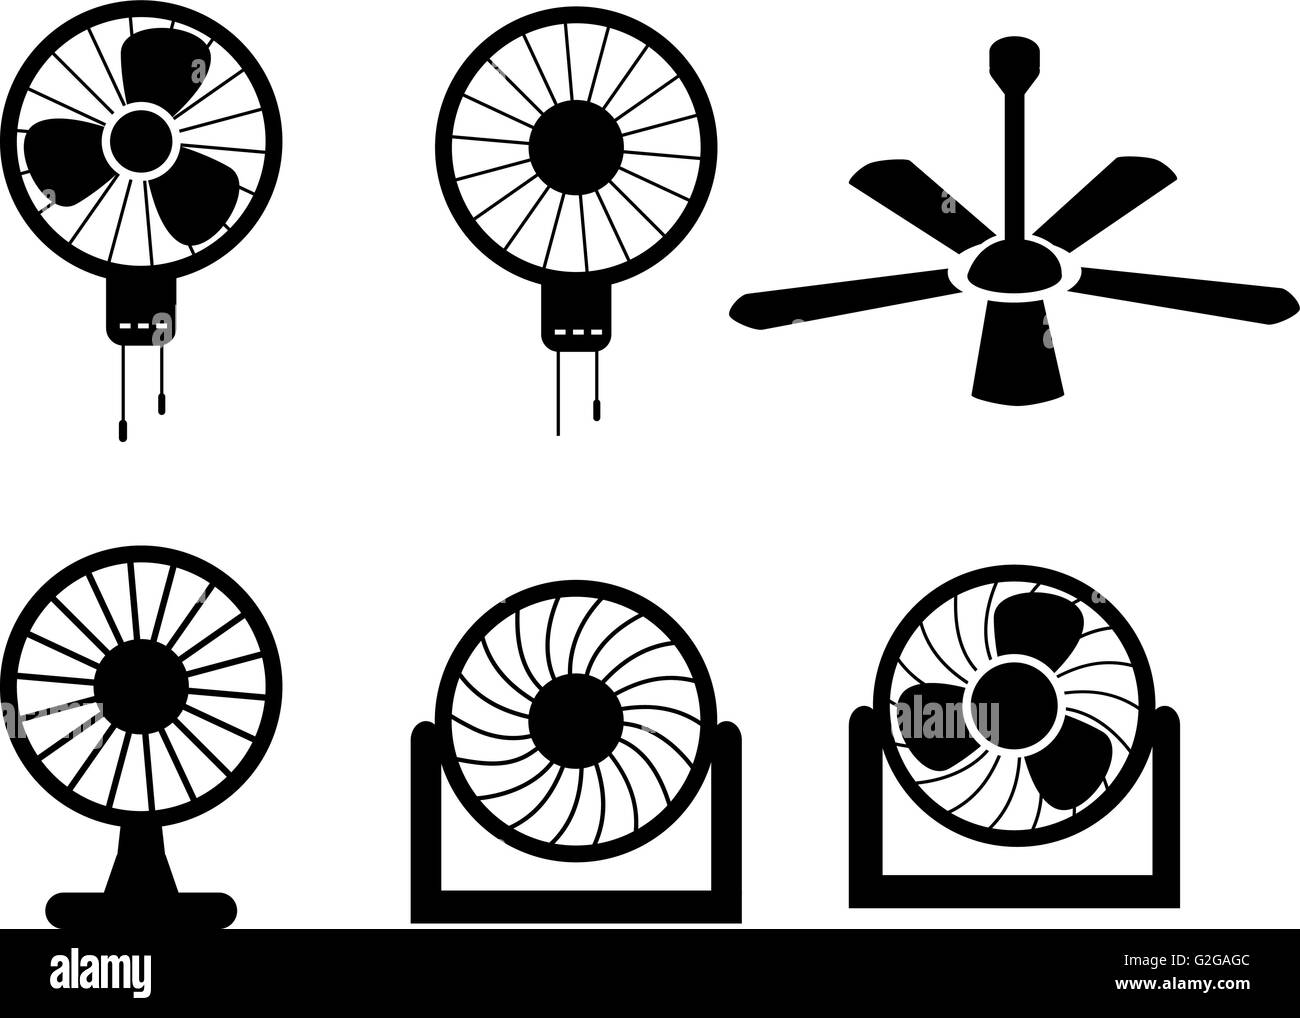 Set of fan icons in silhouette style, vector object Stock Vector